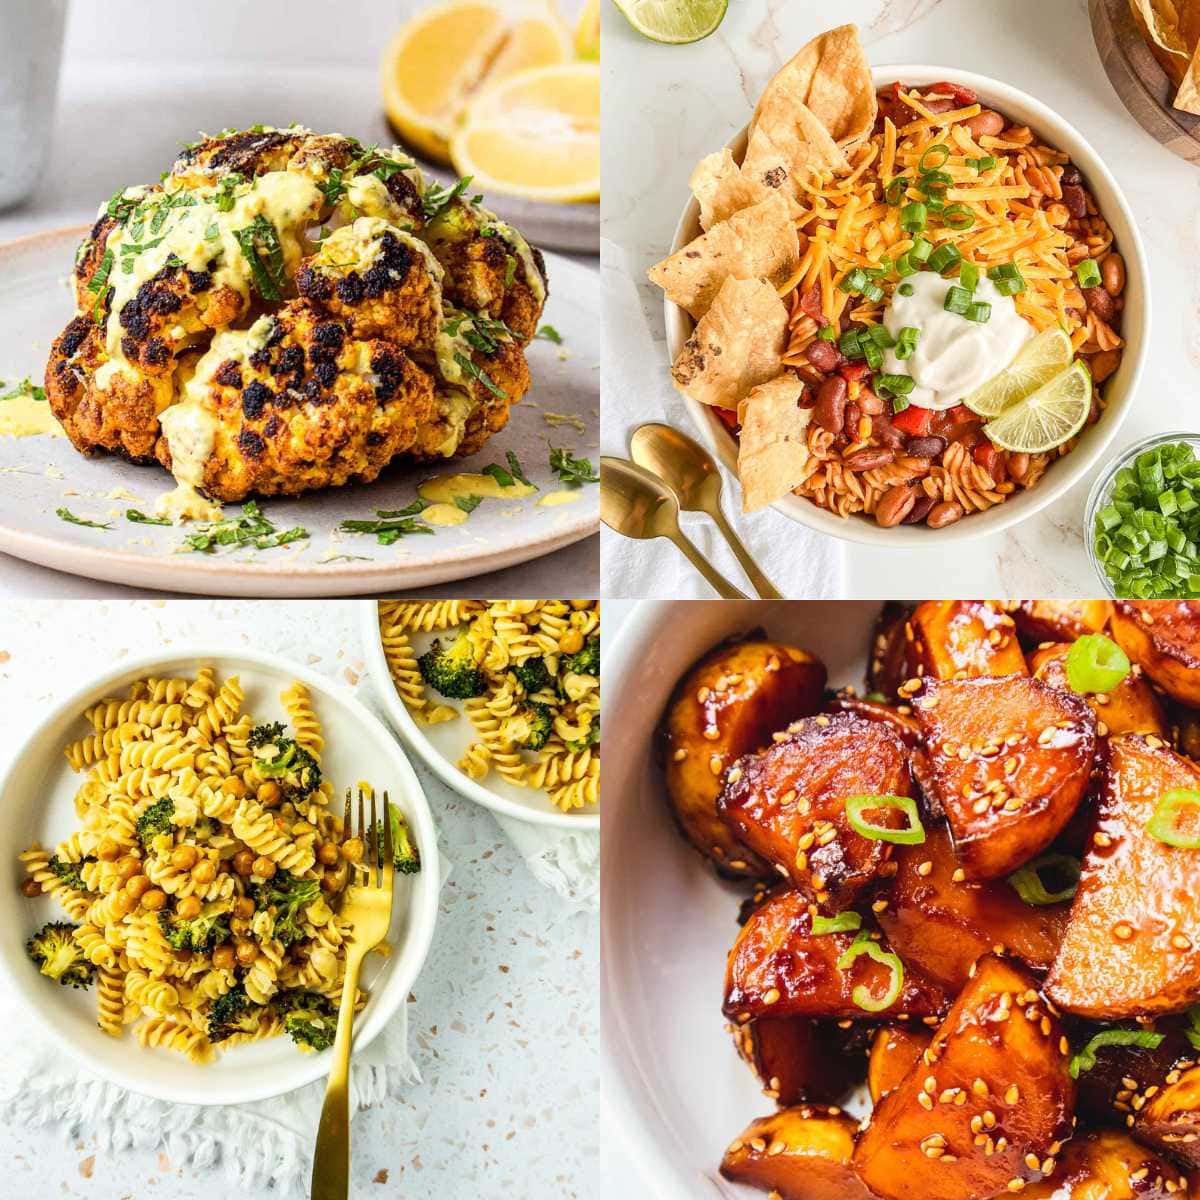 50 Vegan and Vegetarian Recipes without Onion or Garlic